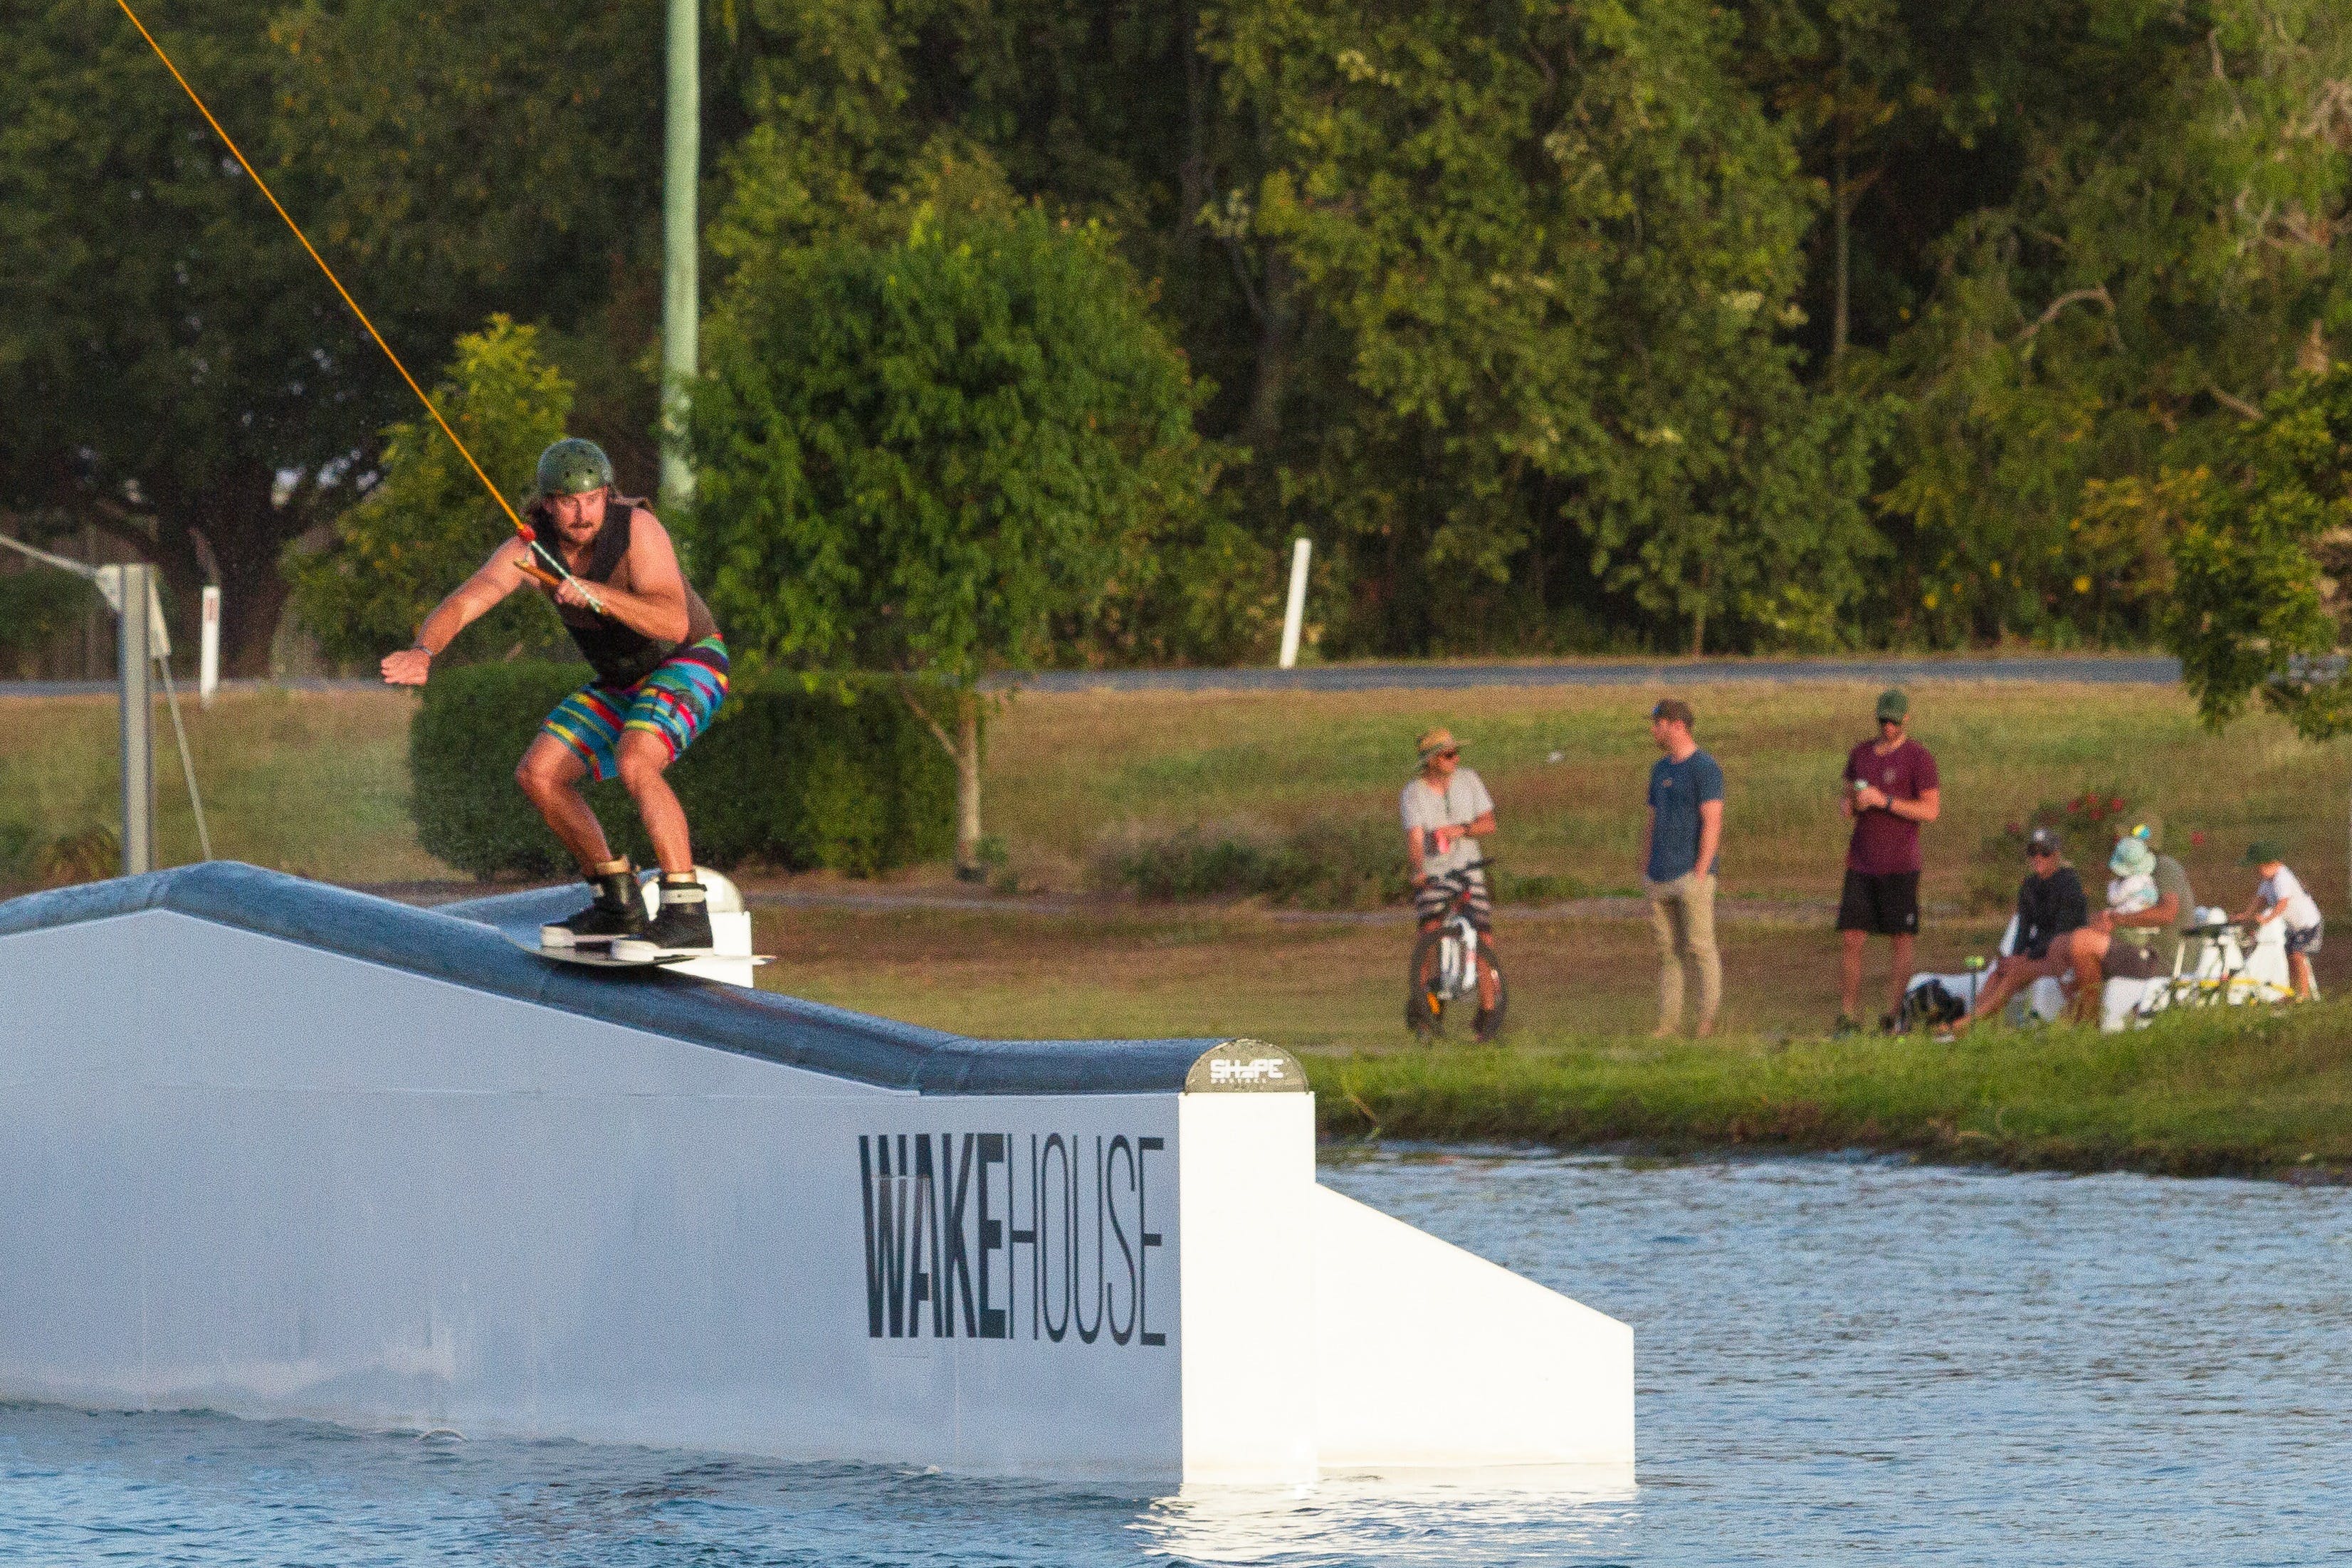 Cash for Tricks - Wakeboarding Comp - 2032 Olympic Games